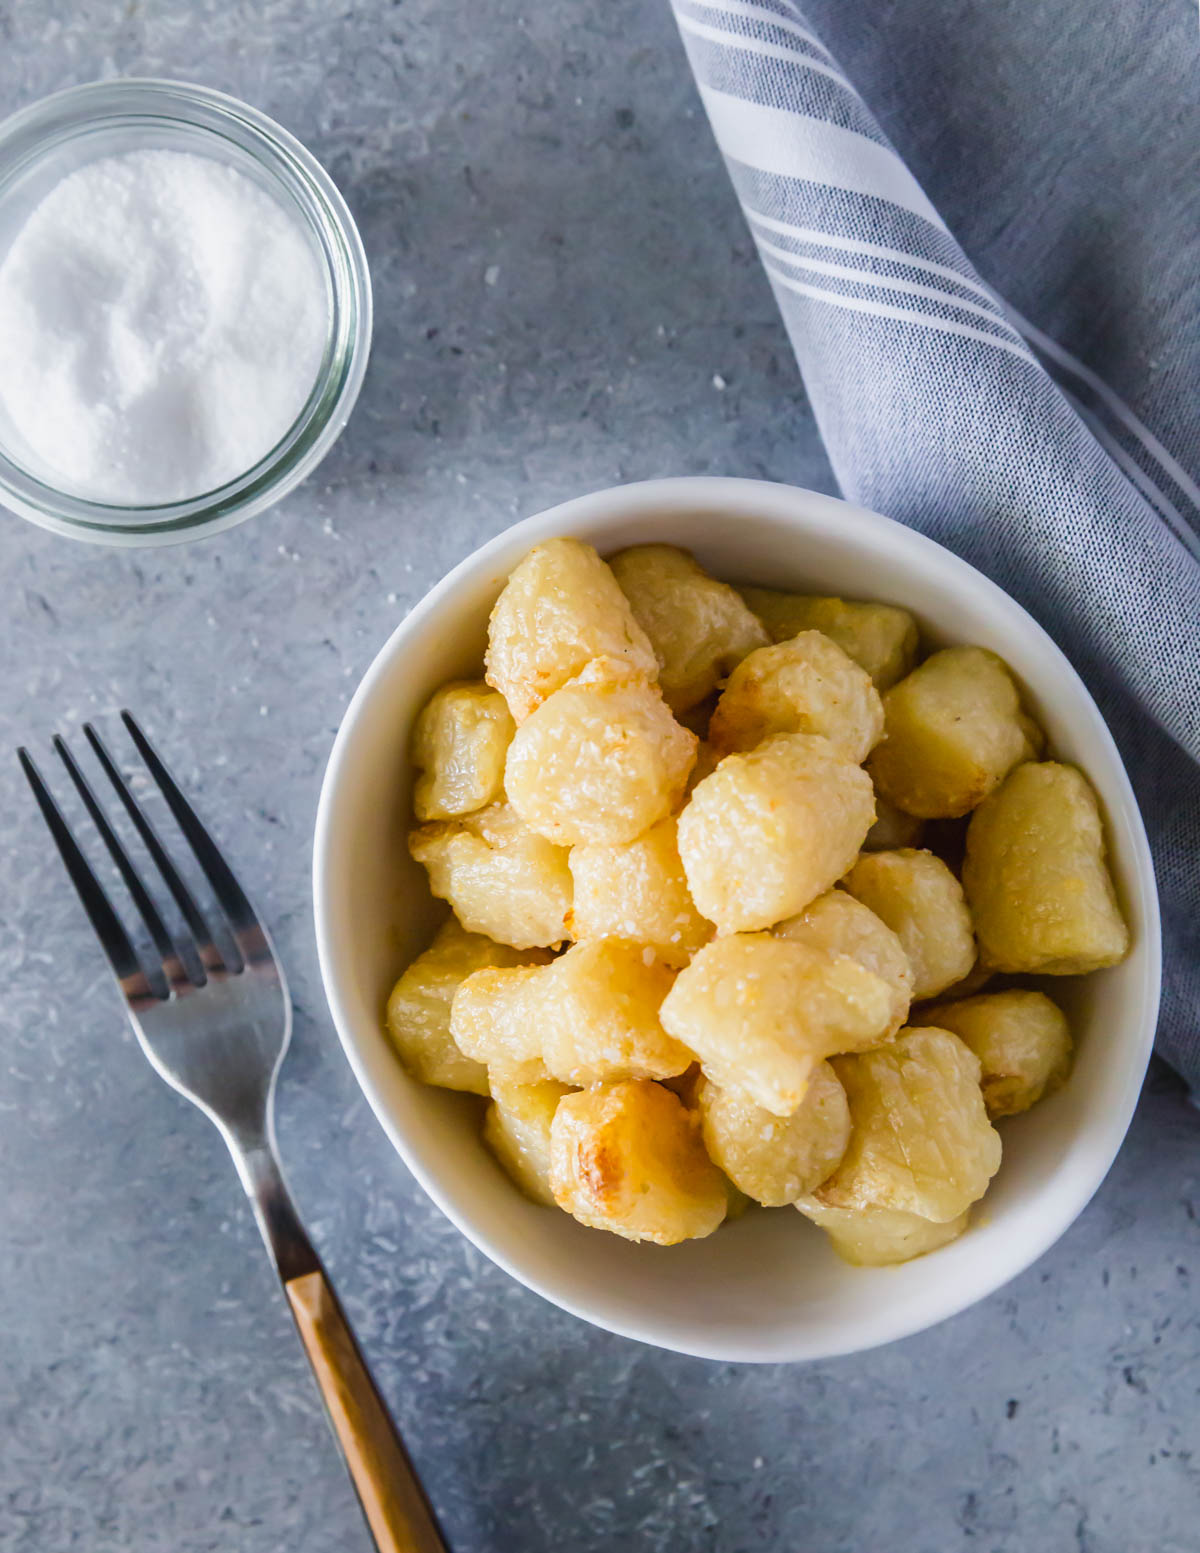 This simple air-fried cauliflower gnocchi with olive oil, garlic powder, and salt is an easy and delicious meal that's ready in just 20 minutes.